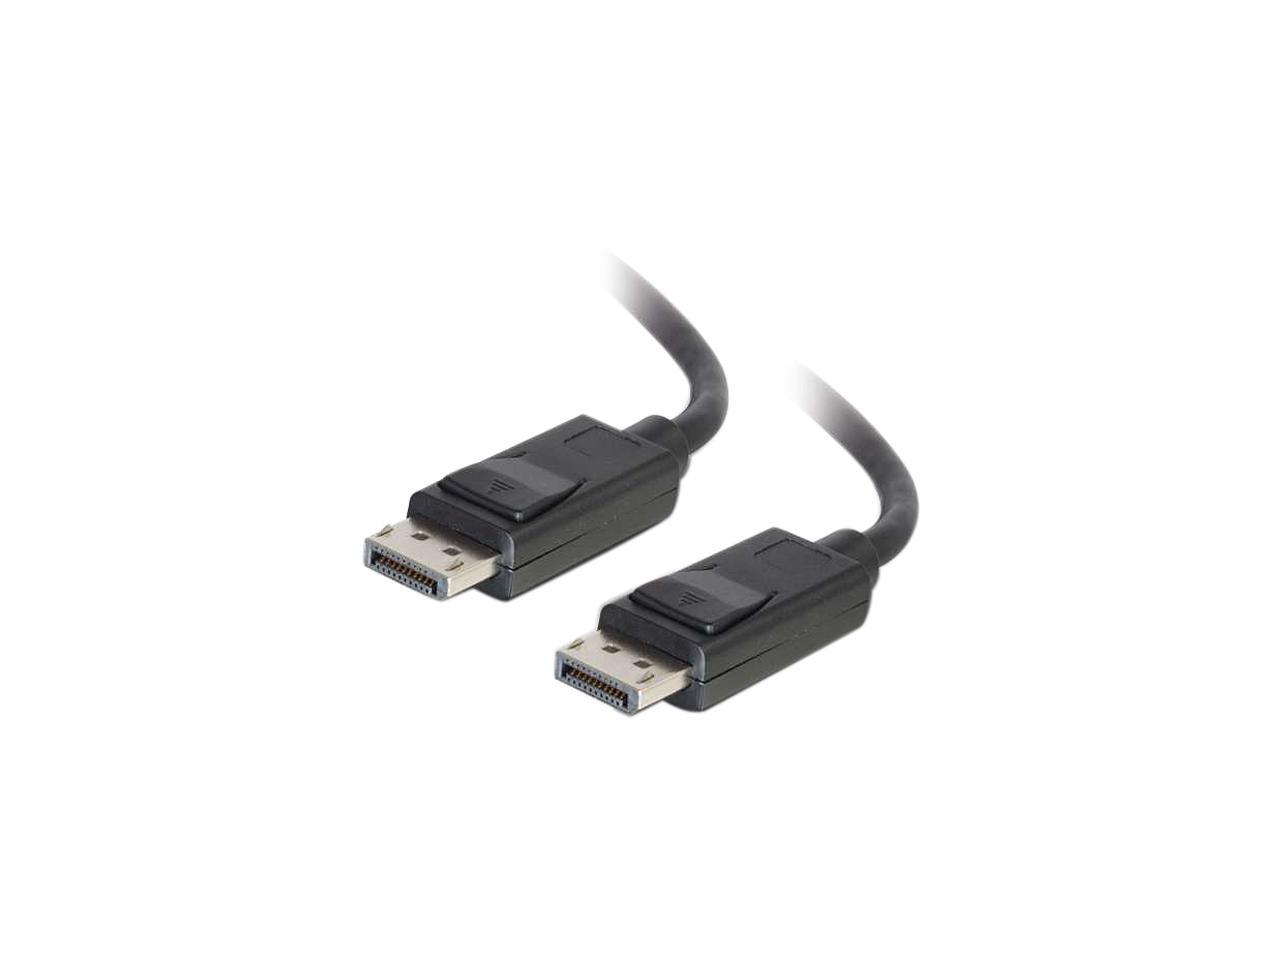 C2G 54401 Displayport Cable with Latches M/M, 8K UHD Compatible - Digital Audio Video, Black (6 Feet, 1.82 Meters)